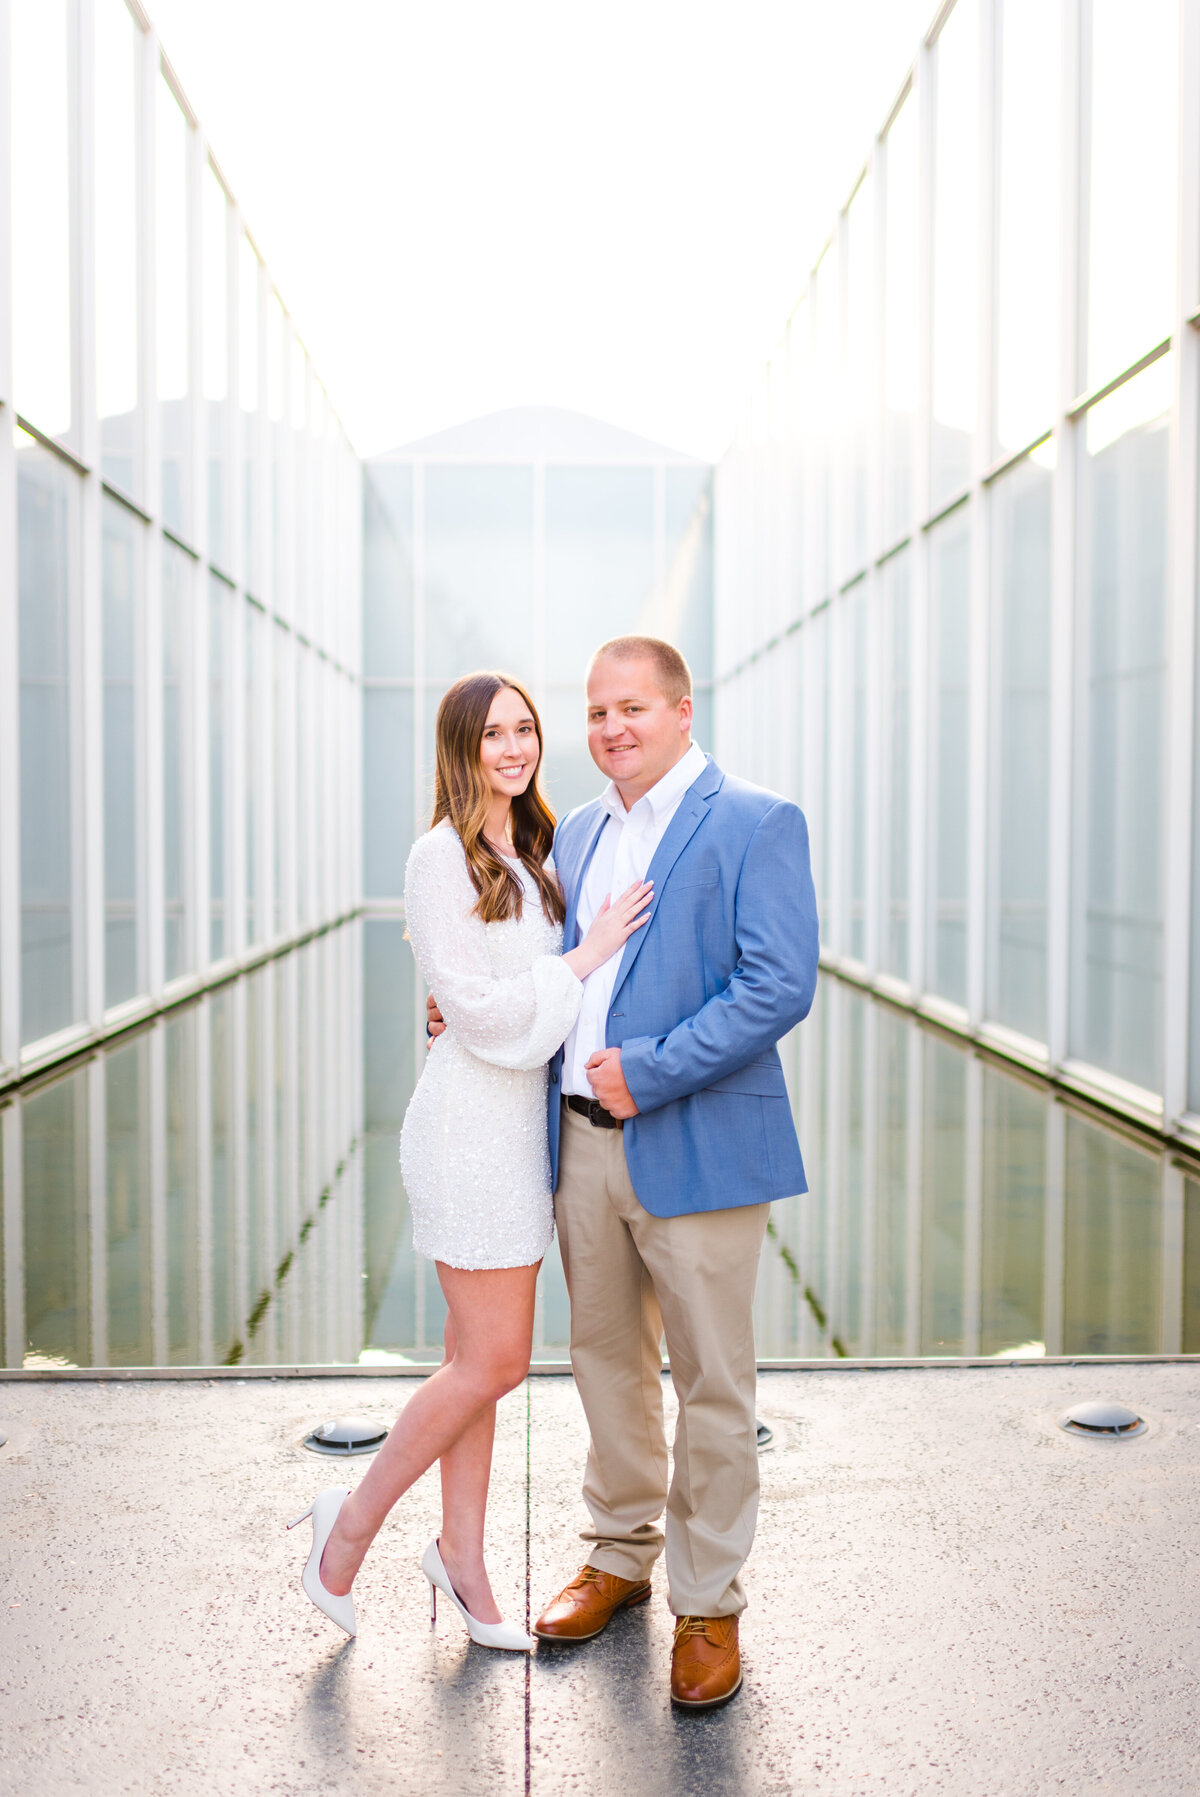 Kaylee + Bryan Engagement Session - Photography by Gerri Anna-63